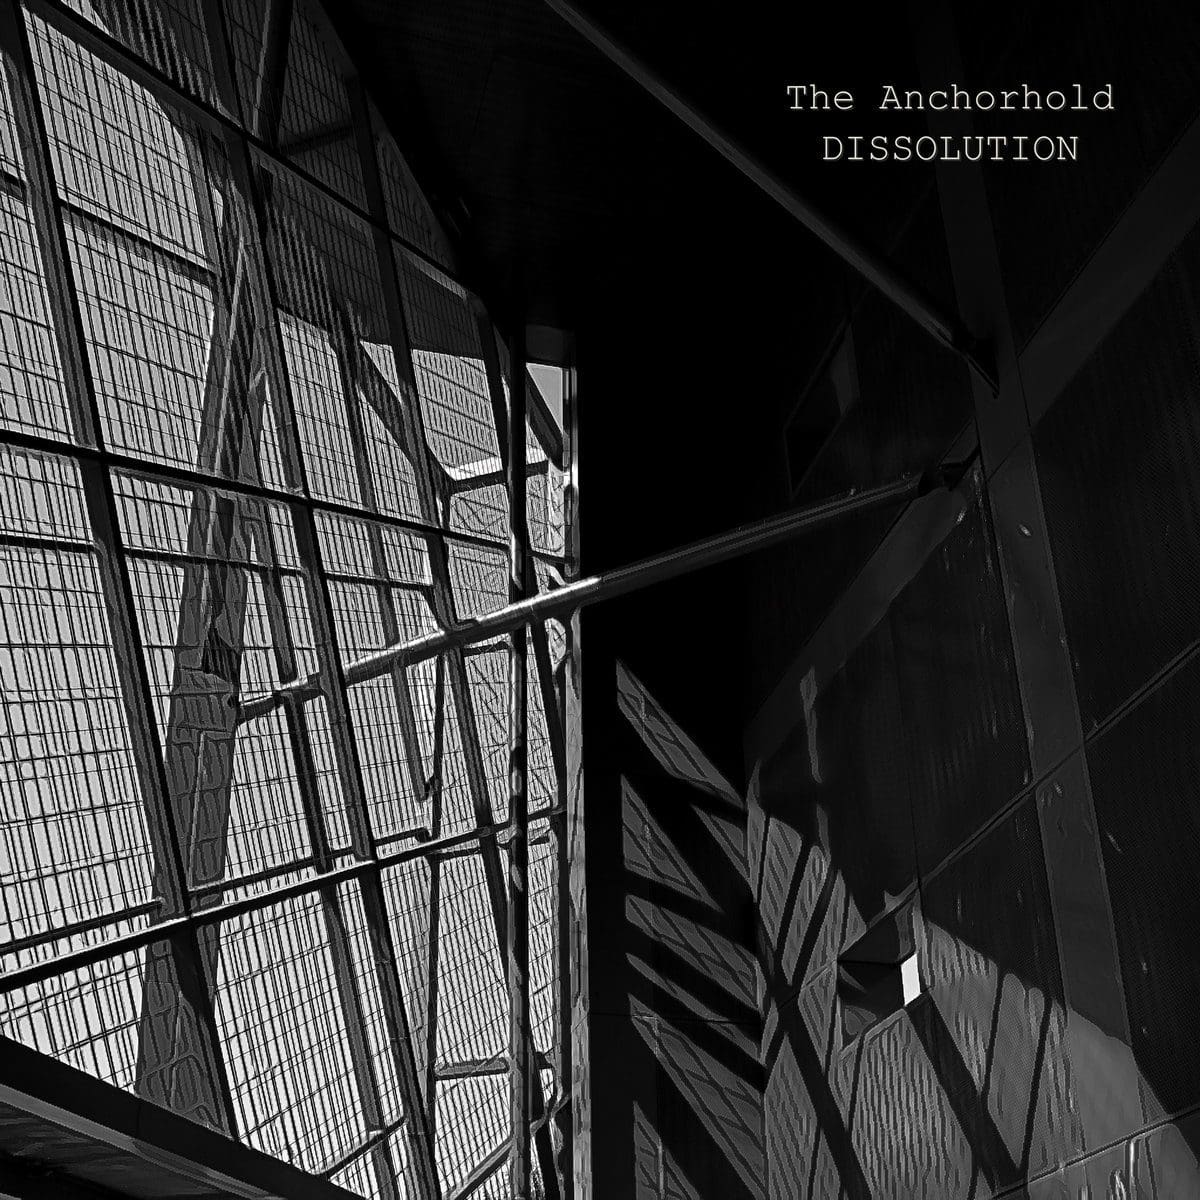 Shane Aungst delivers his take on Phil Stiles' latest studio album resulting in 'The Anchorhold Dissolution'